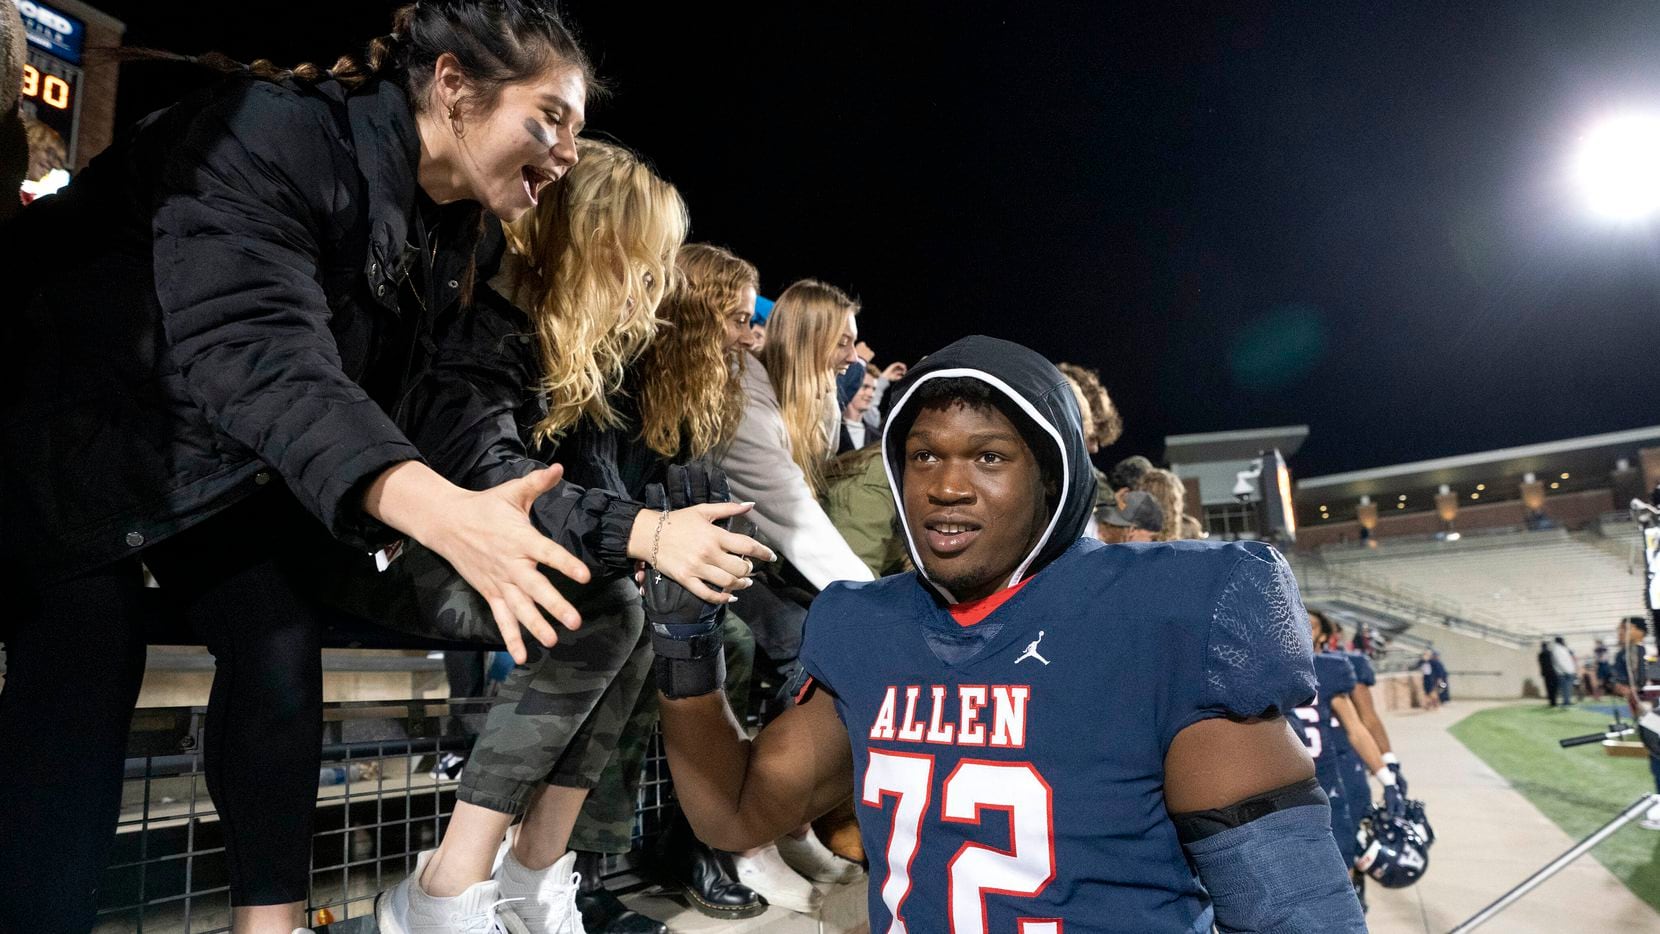 Allen senior offensive lineman Neto Umeozulu (72) celebrates with fans after his team’s 59-30 victory over Hebron in a bi-district round high school football playoff game on Friday, Nov. 12, 2021 at Eagle Stadium in Allen, Texas. (Jeffrey McWhorter/Special Contributor)